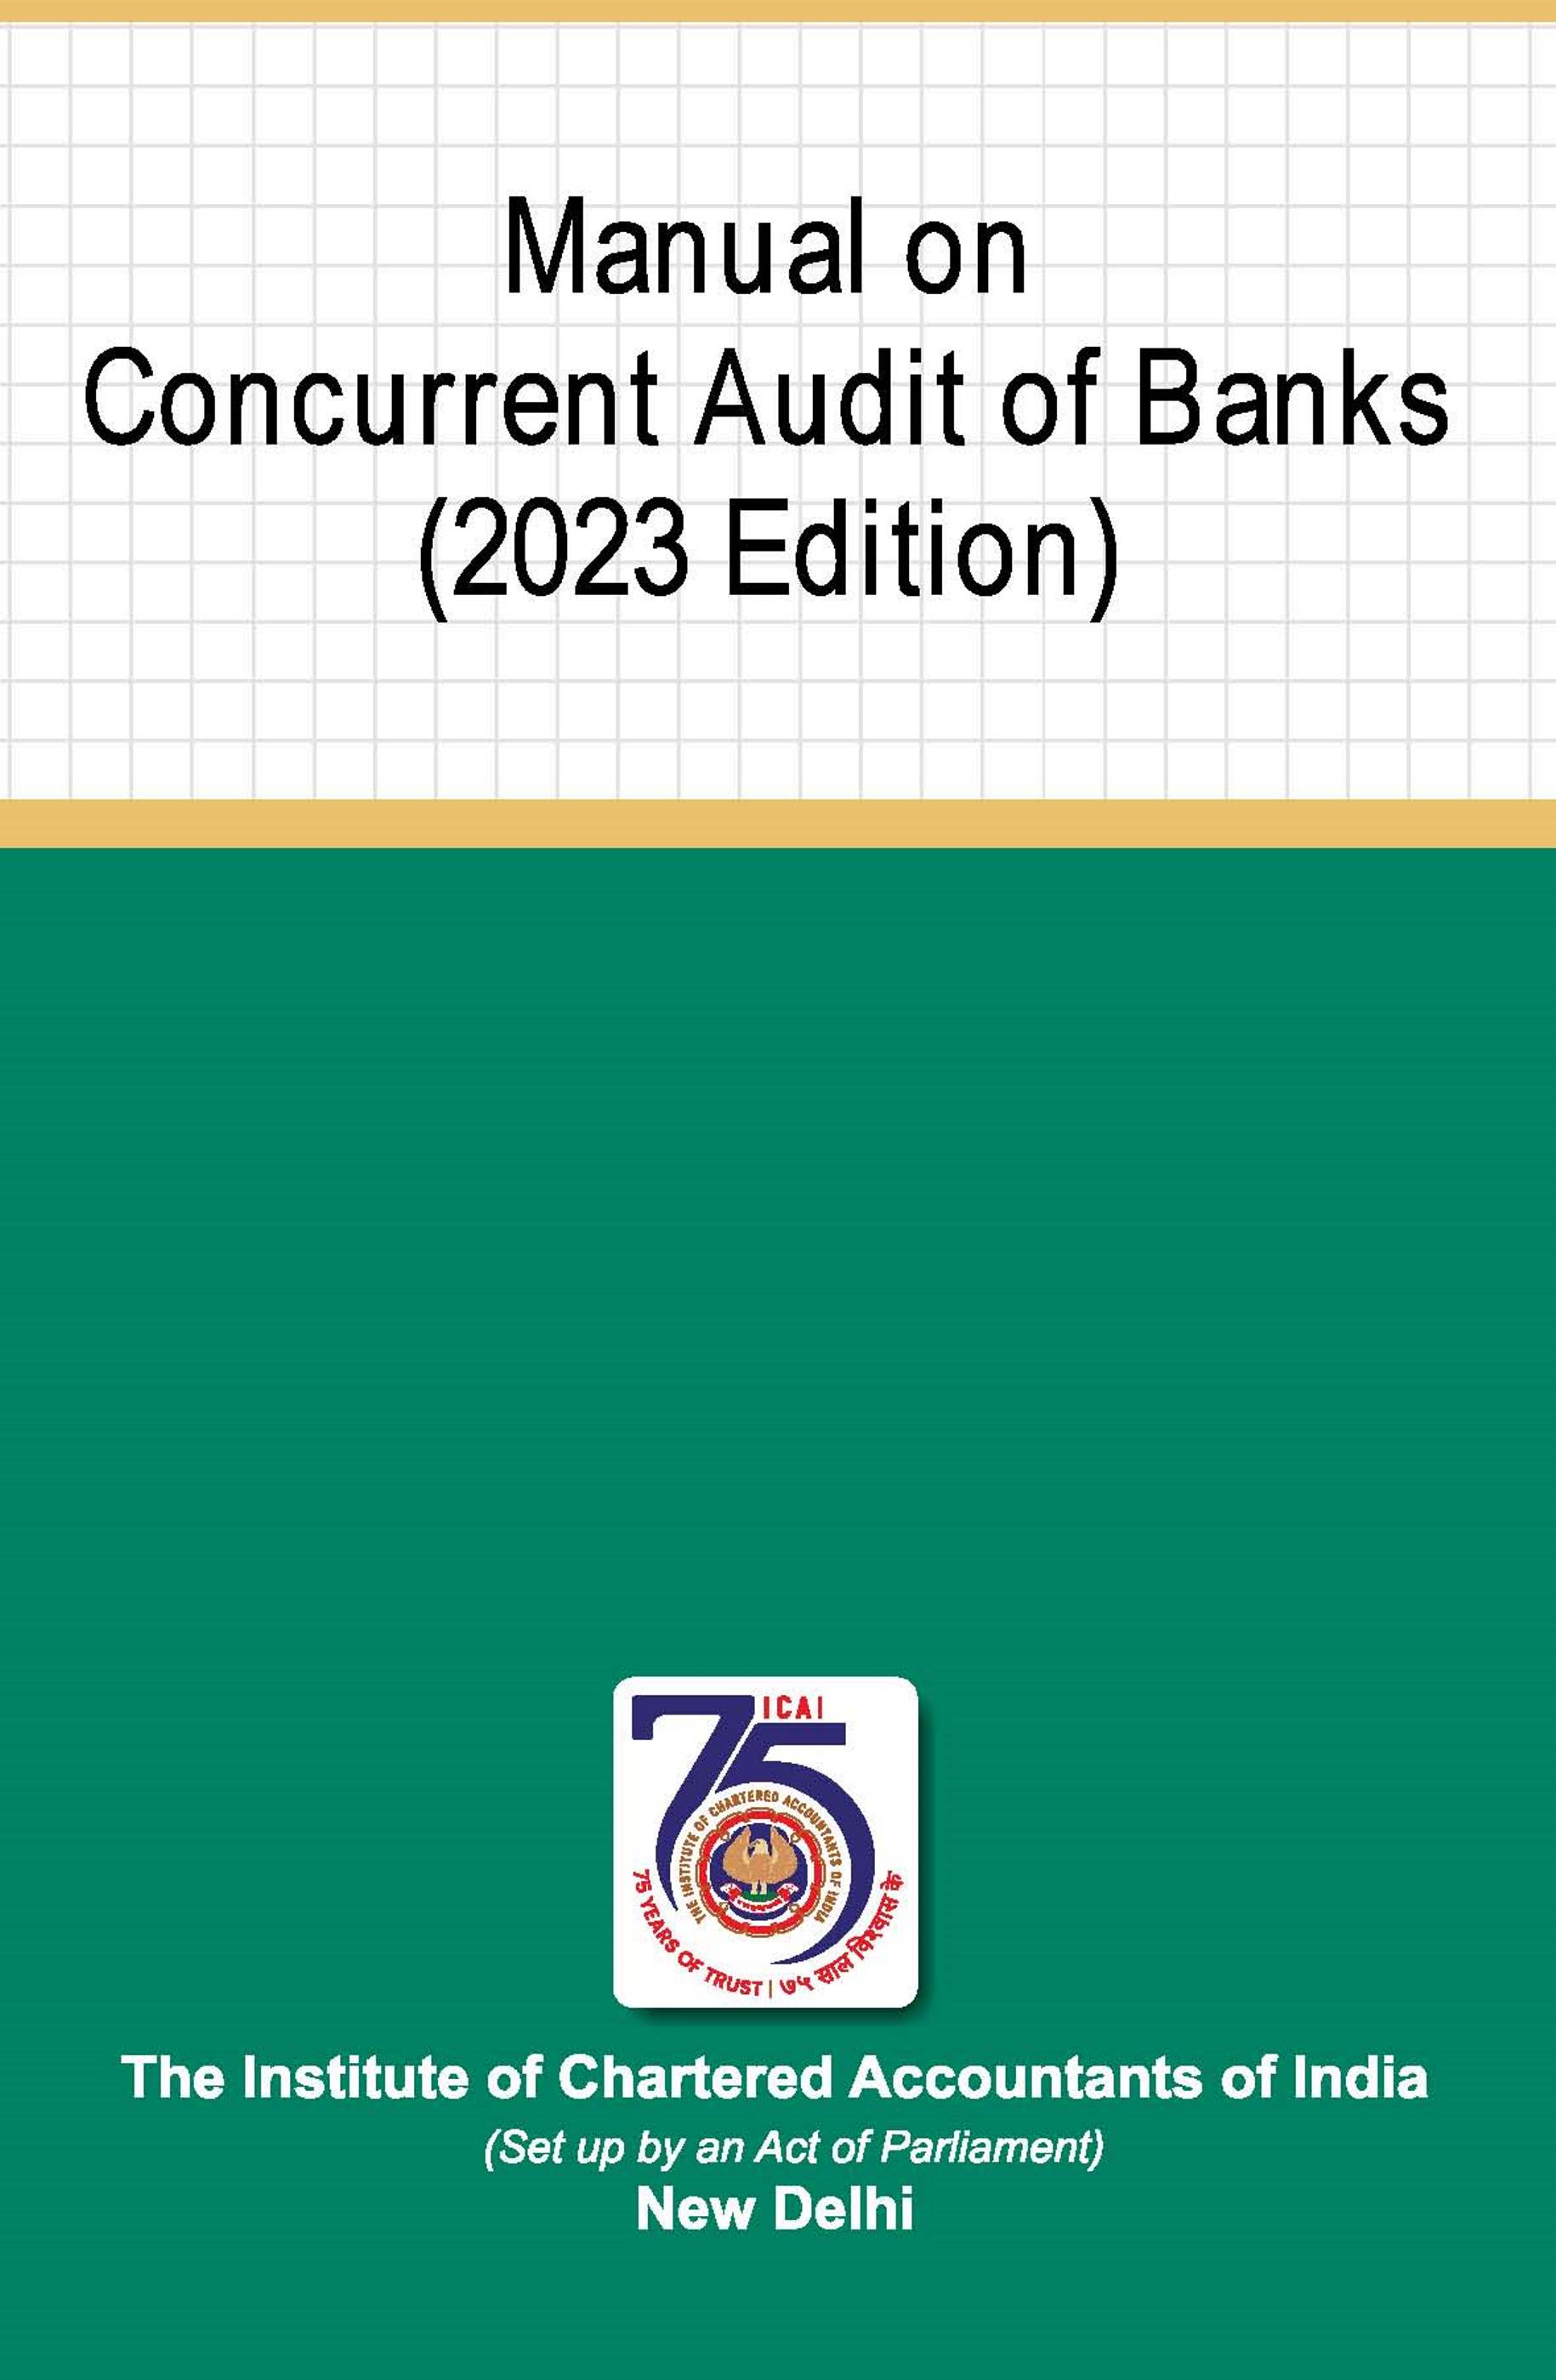 Manual on Concurrent Audit of Banks (2023 Edition)